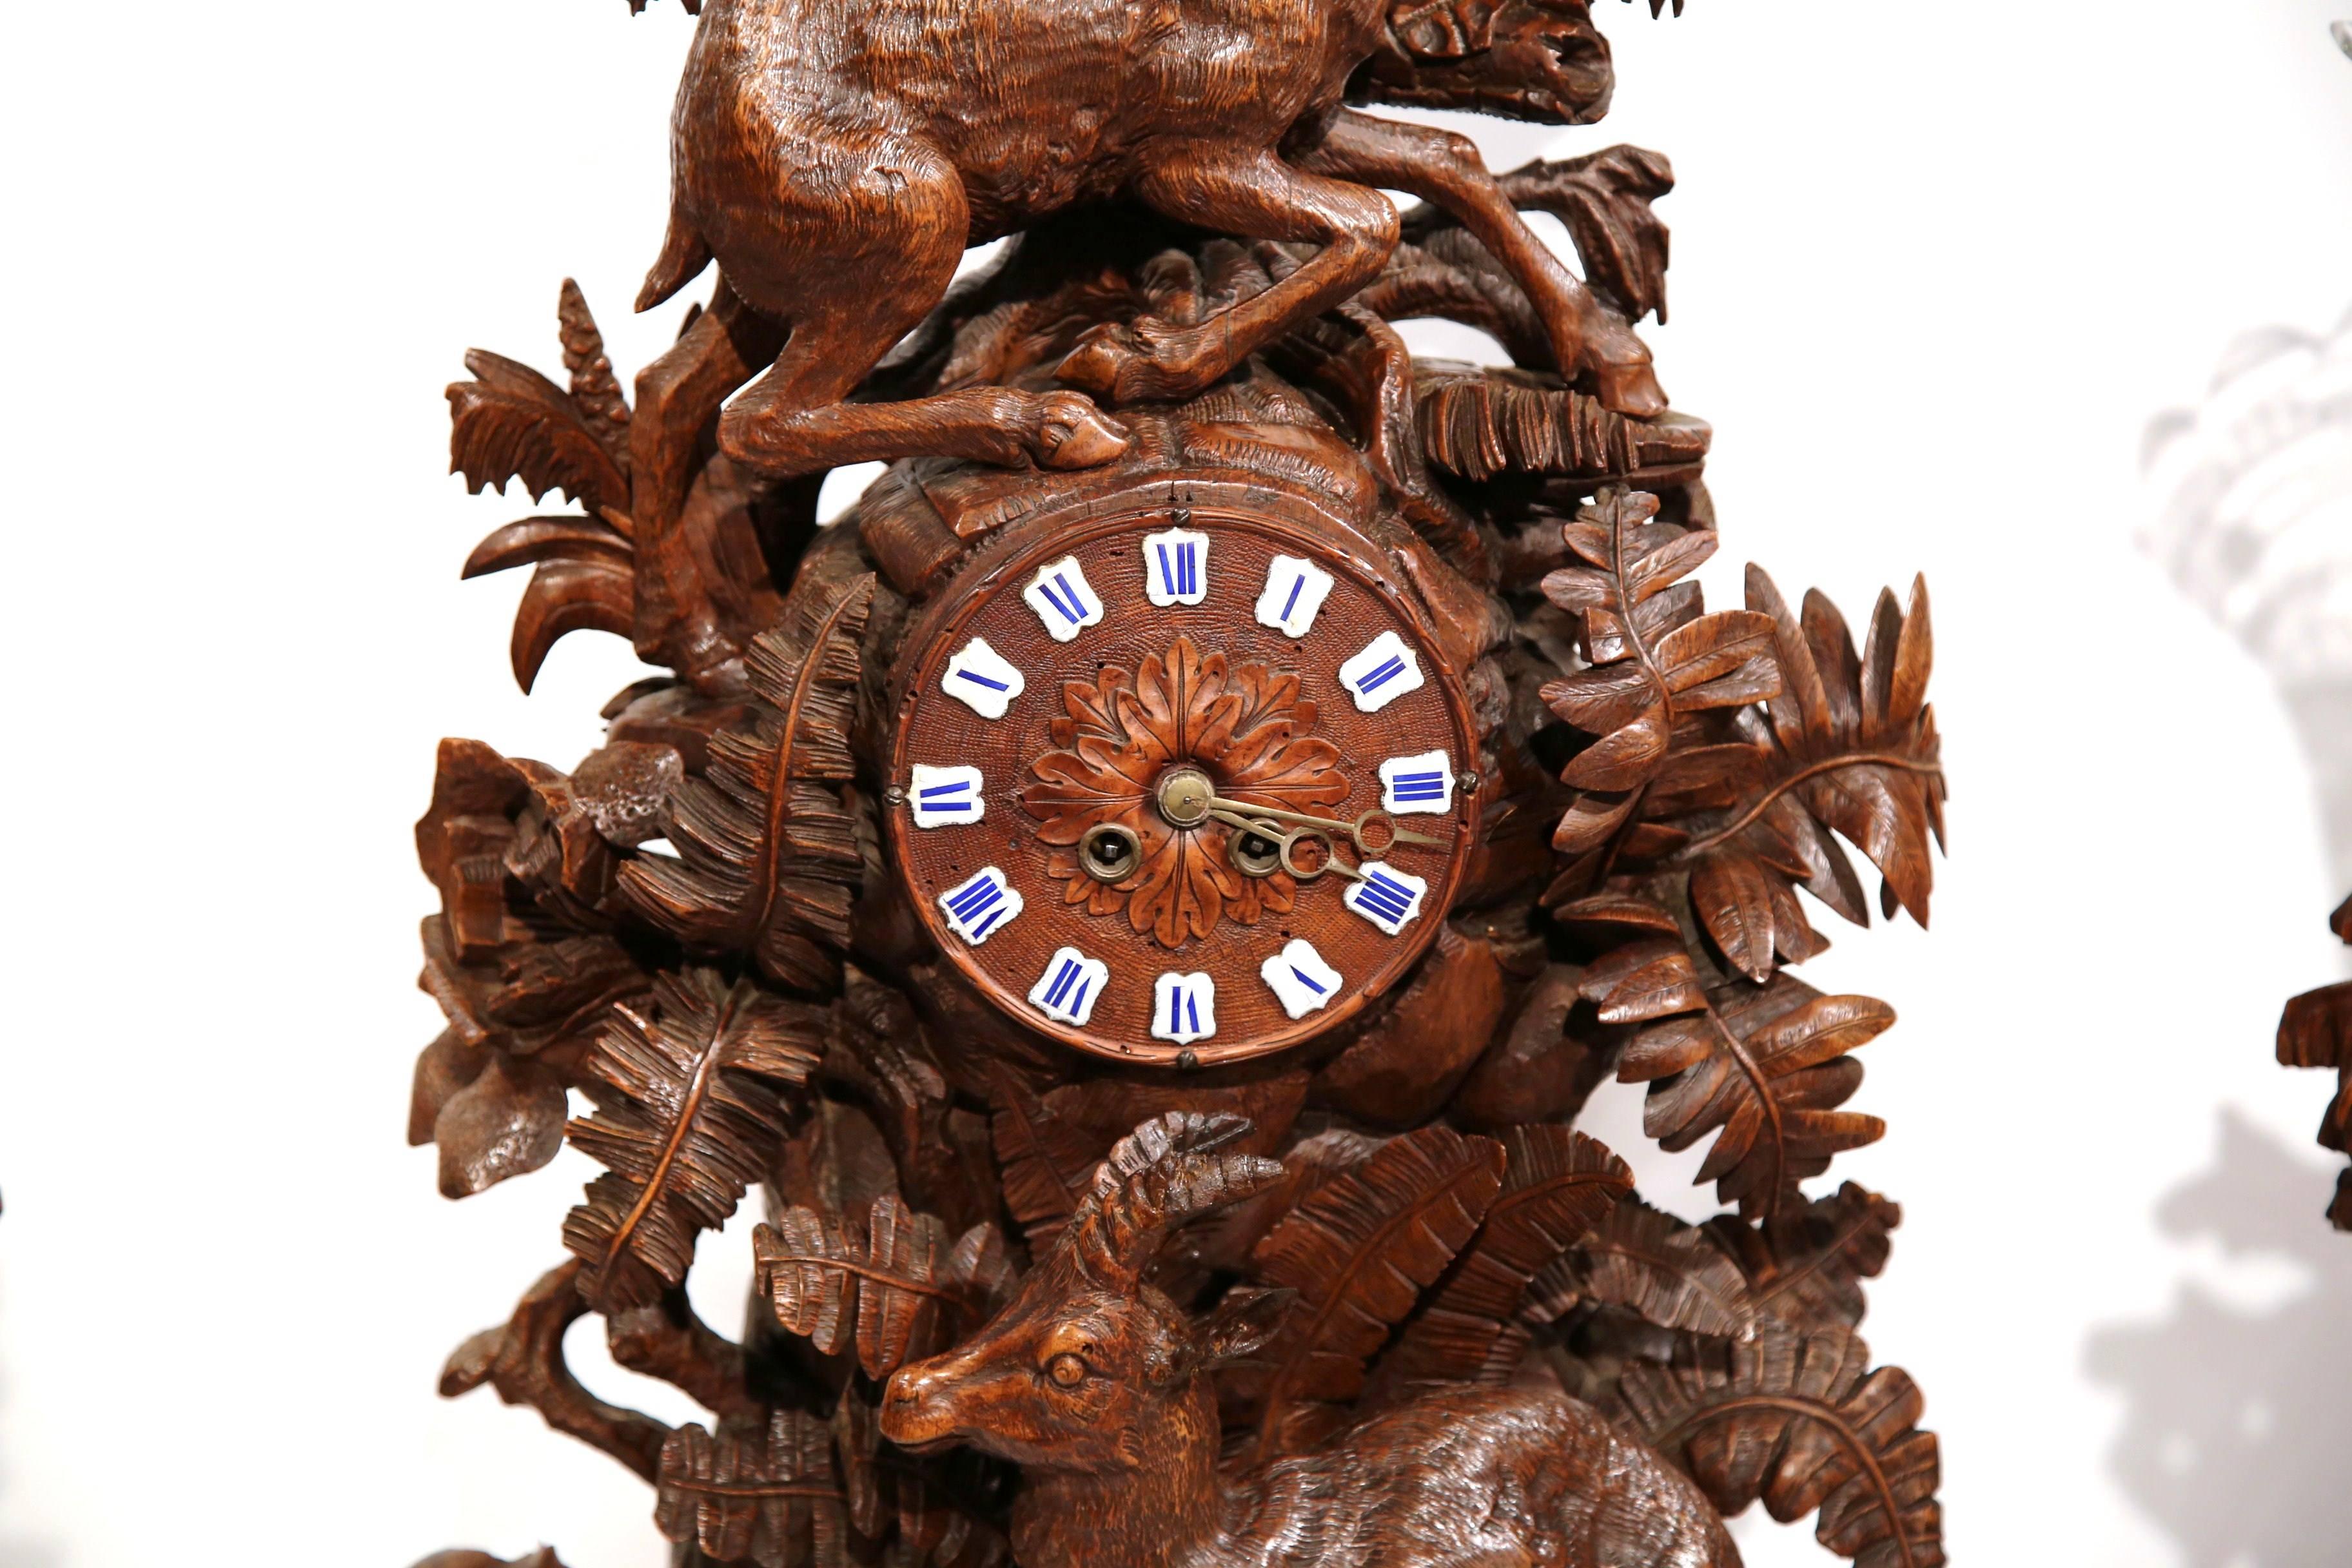 This important antique three-piece mantel clock set was crafted in Switzerland, circa 1860. The impressive, hand carved fruitwood clock features a deer at the pediment above the round face clock and embellished with a resting chamois, trees, floral